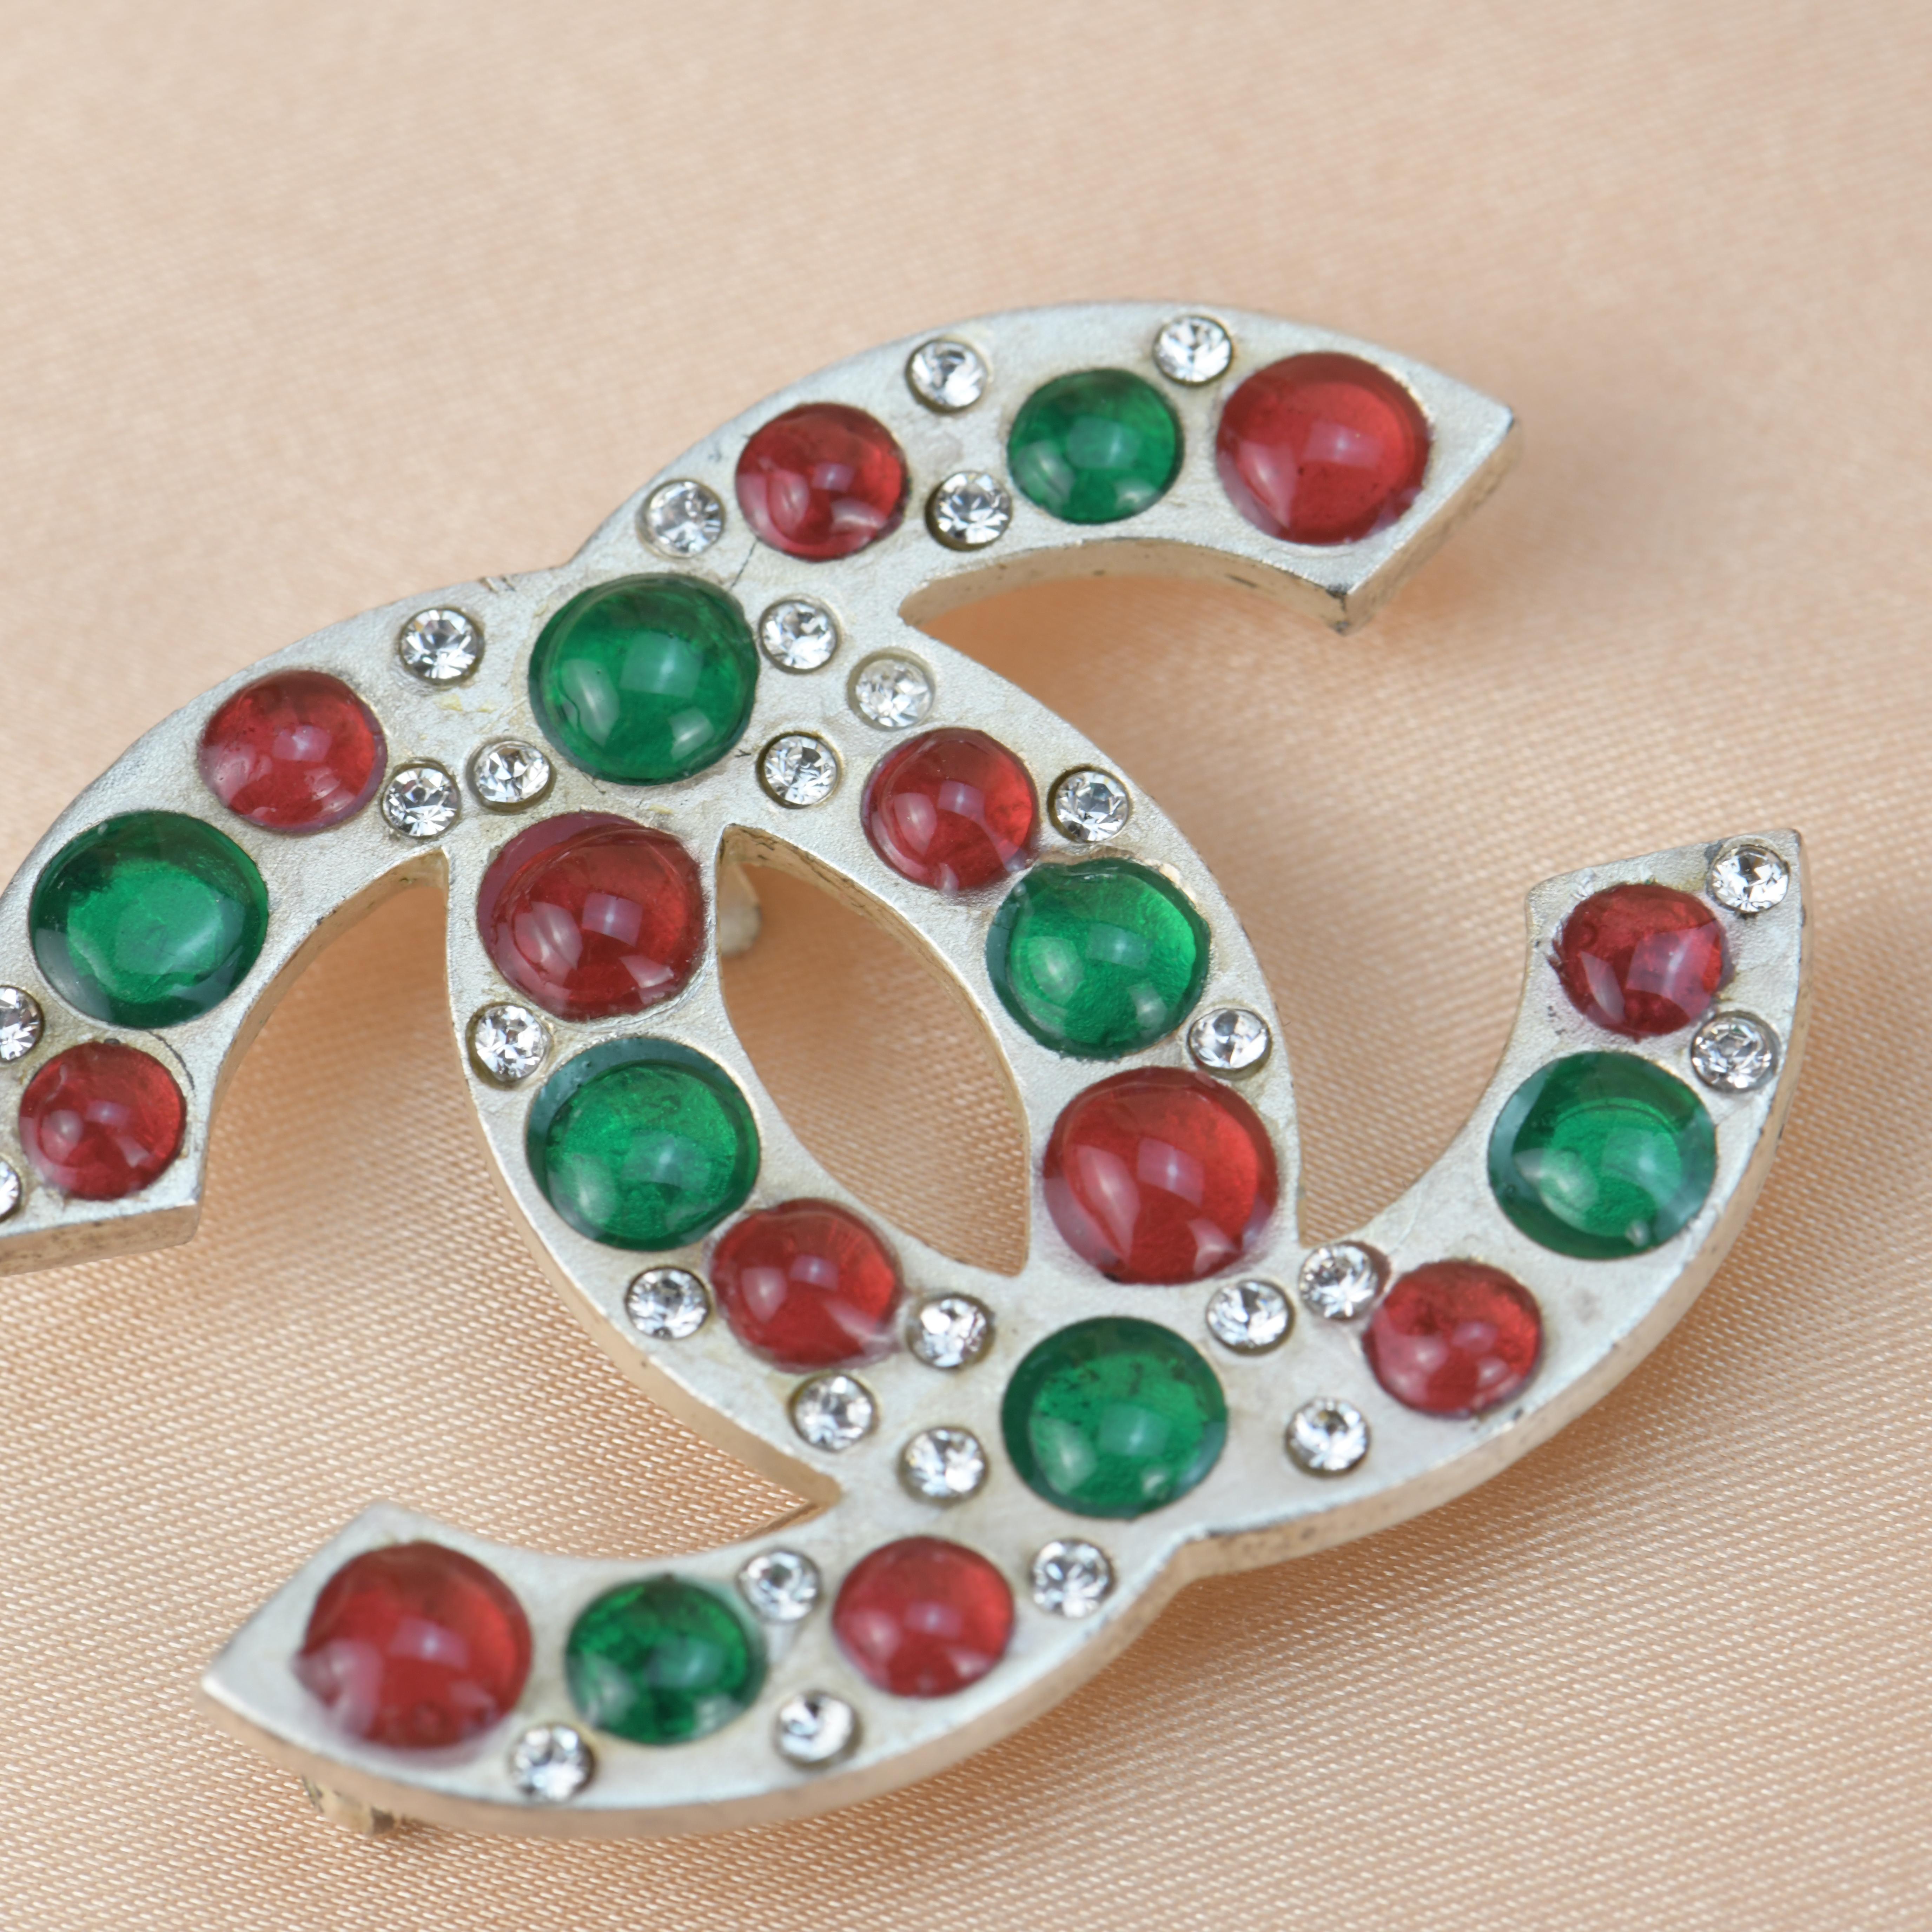 Chanel Vintage Silver Gilt CC Brooch with Vermilion and Emerald Green Gripoix 2